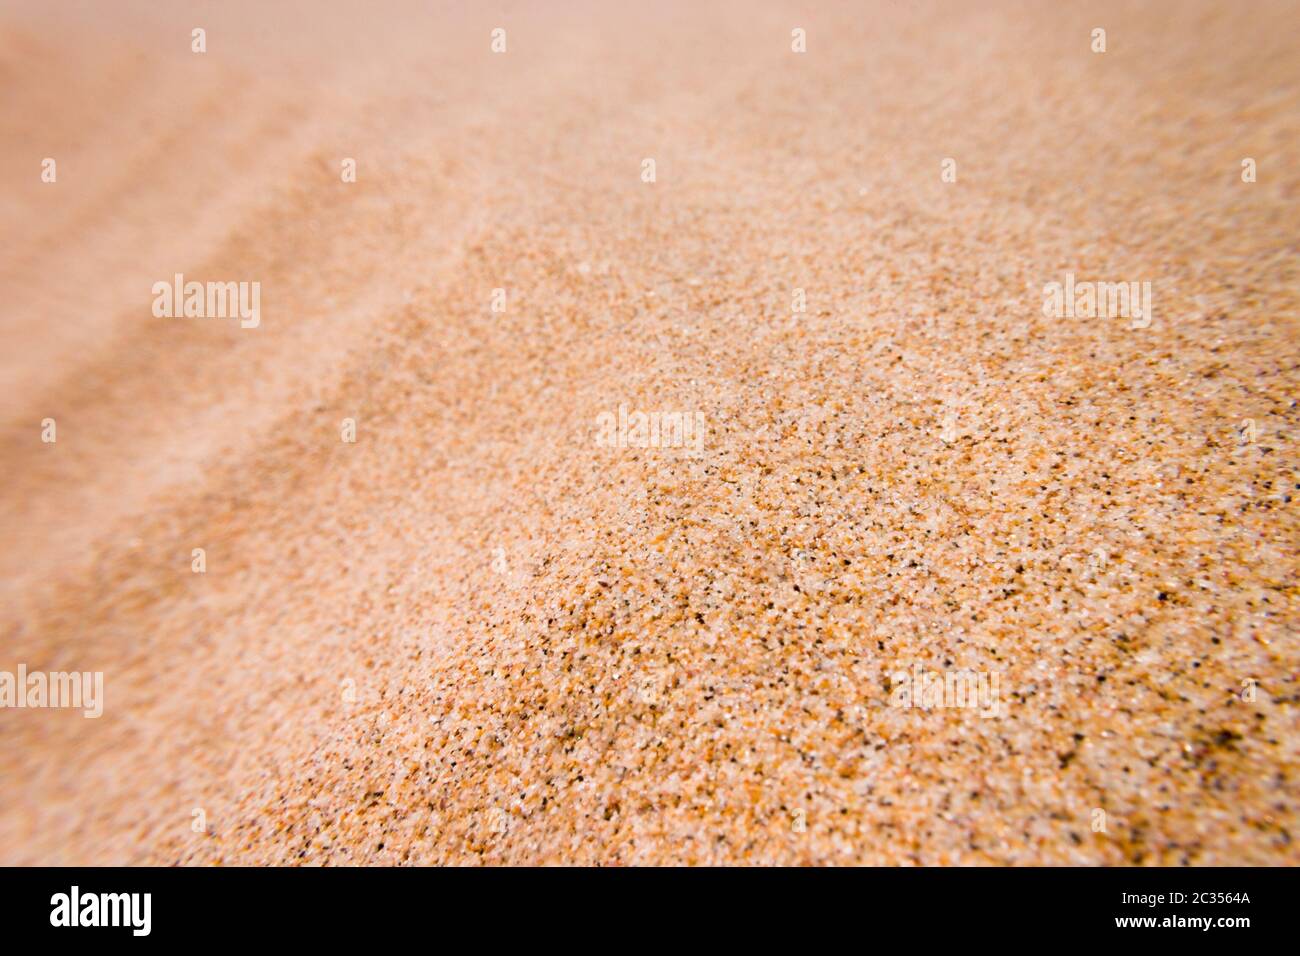 Grain of sand with depth of field Stock Photo